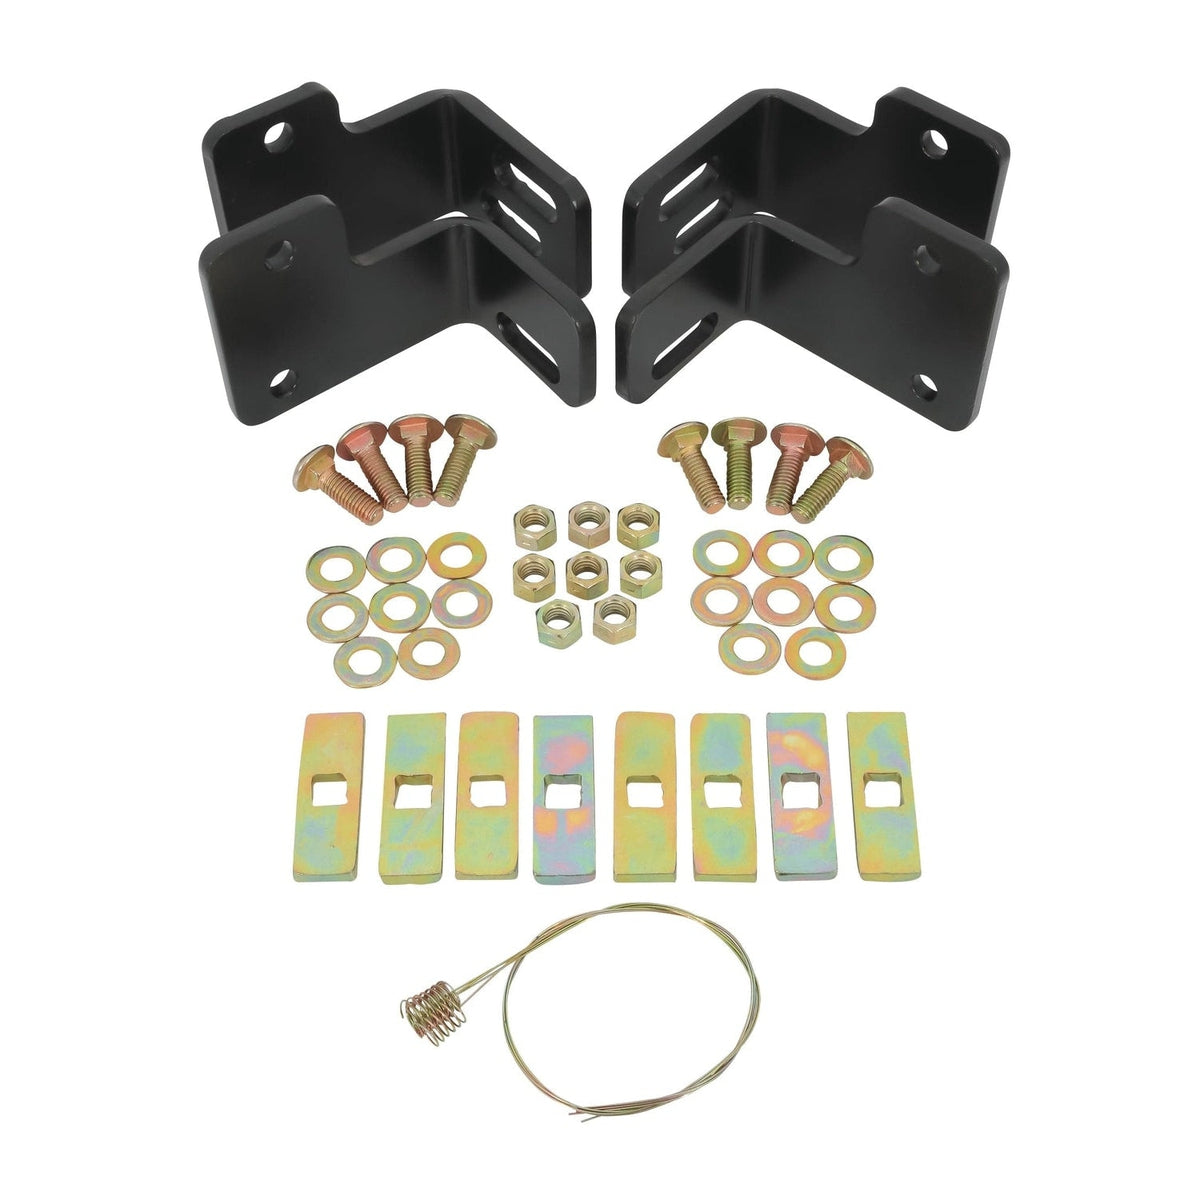 Eaz-Lift Qualifies for Free Shipping Eaz-Lift 5th Wheel Adapter Kit Eazlift fits Ford F150 04-14 #48593